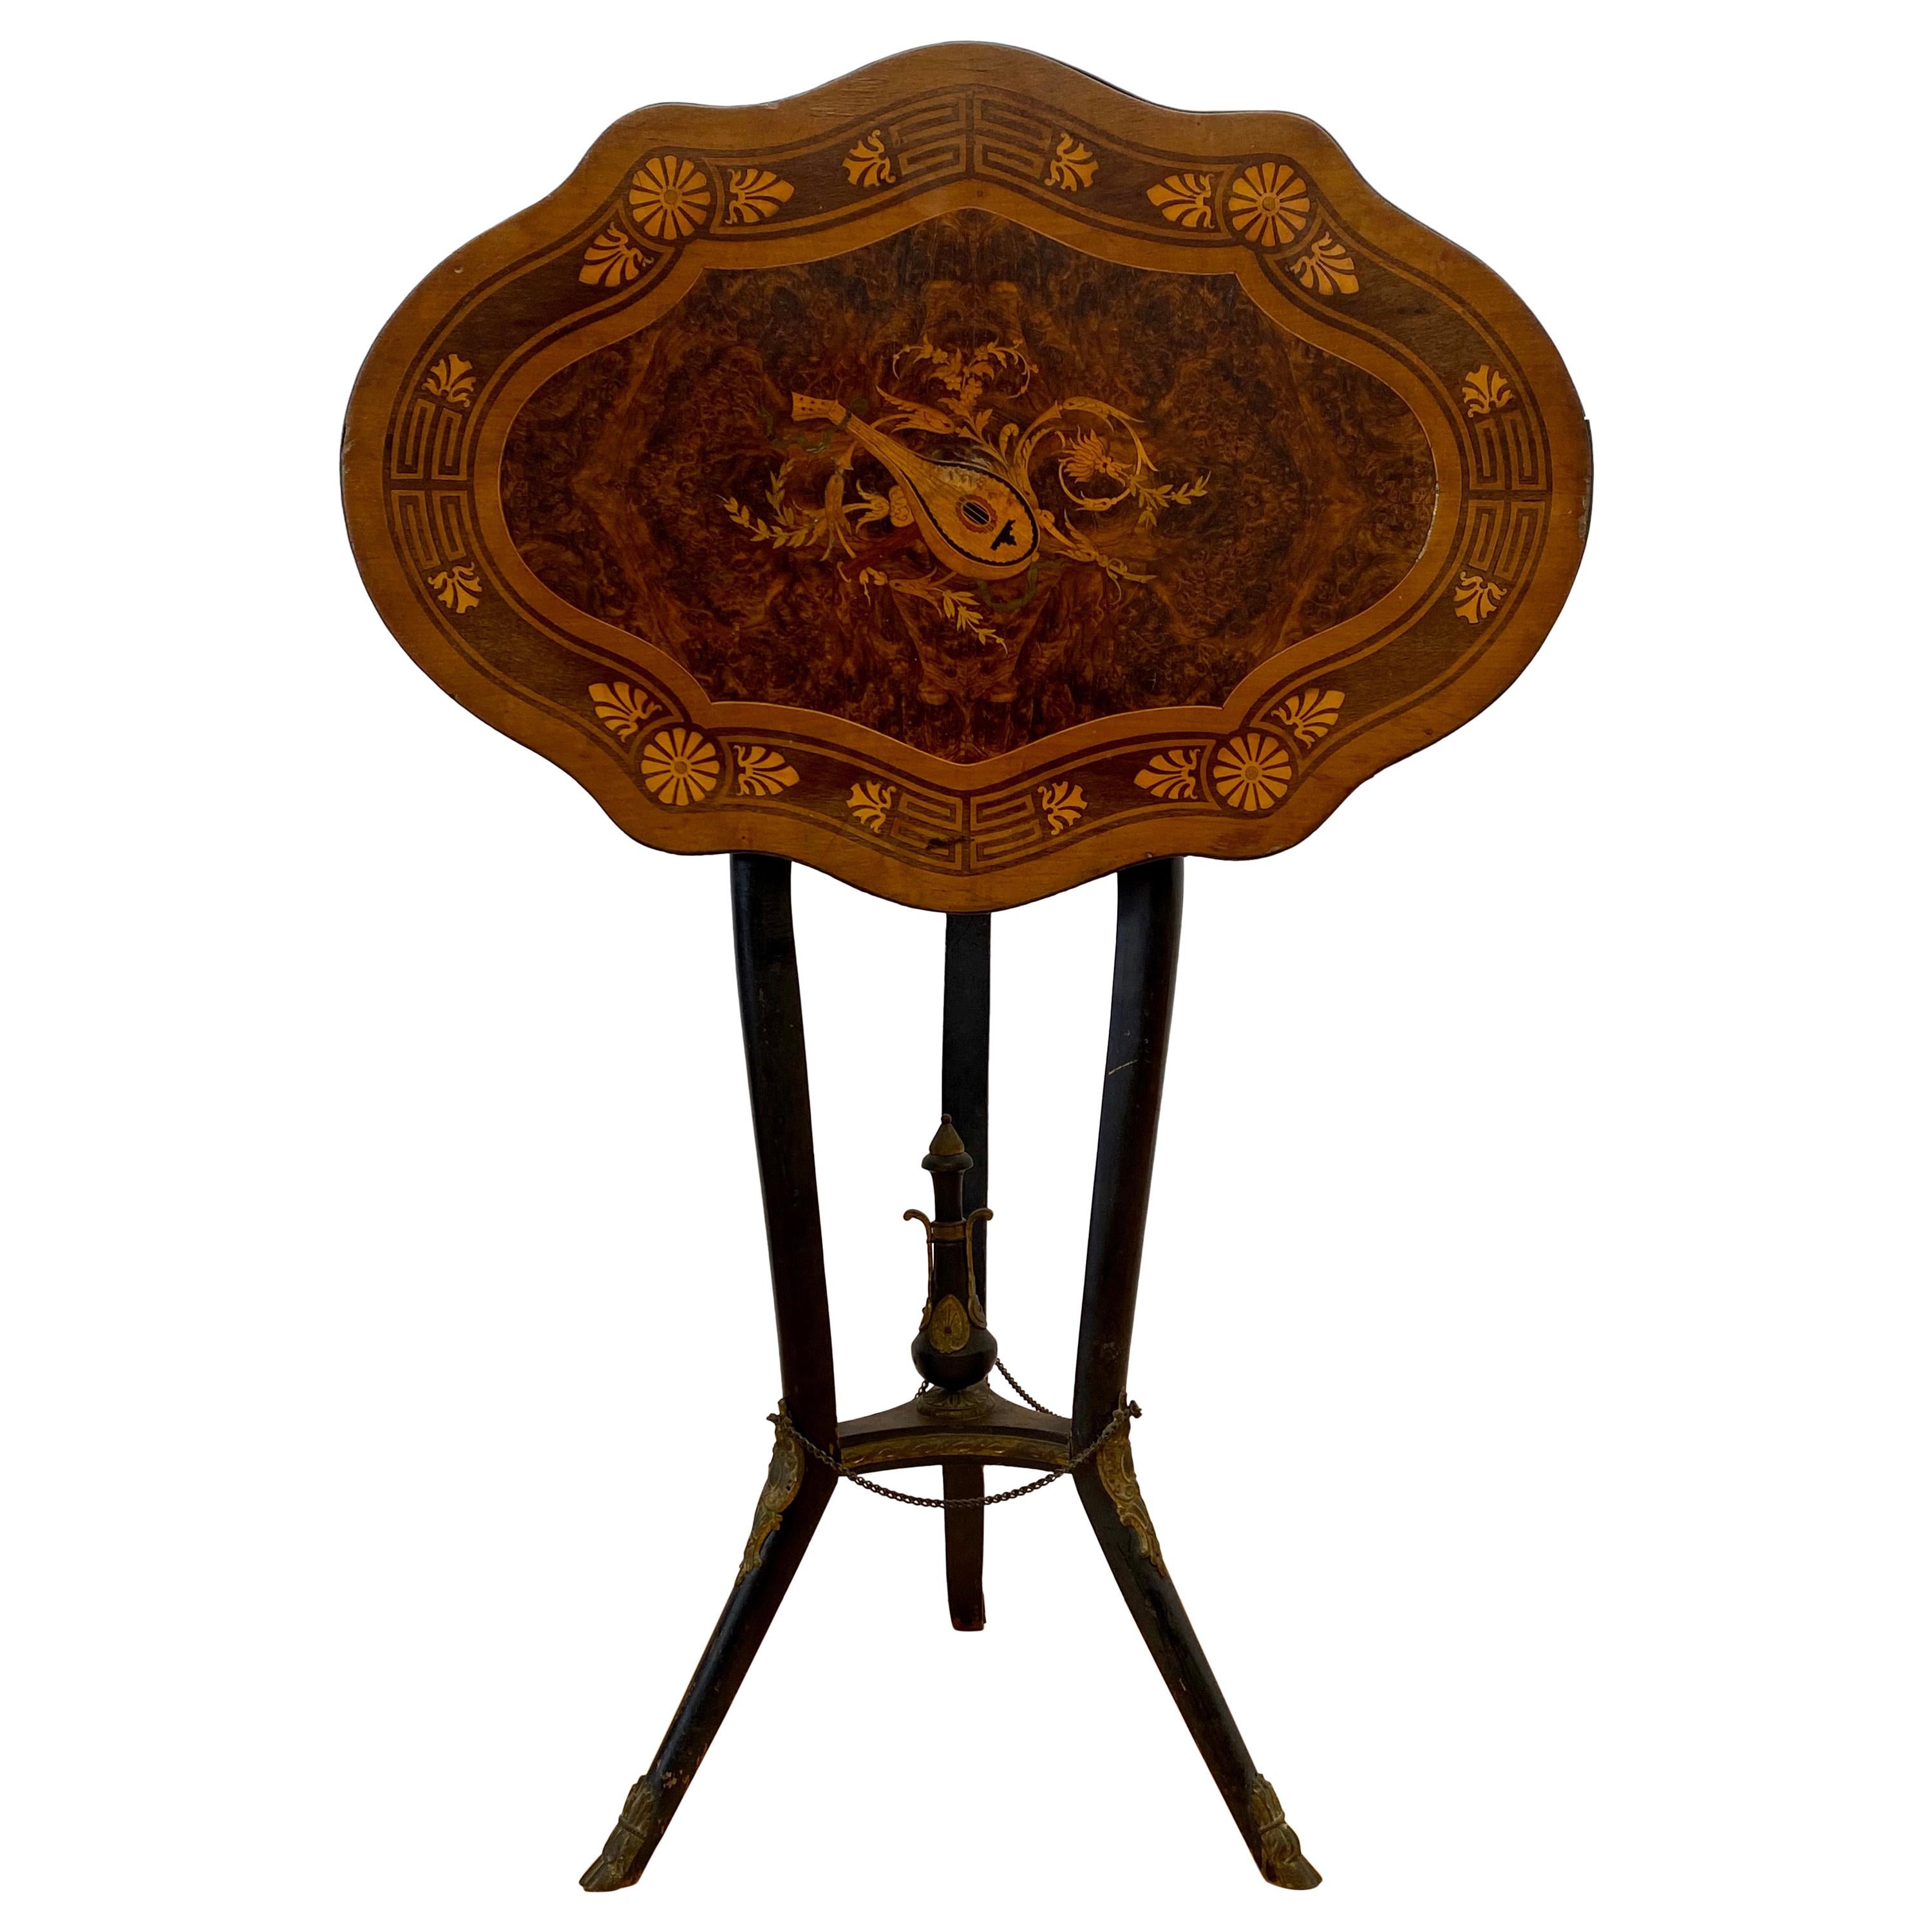 Early 20th Century Victorian European Walnut Inlaid Tilt Top Table c.1900 For Sale